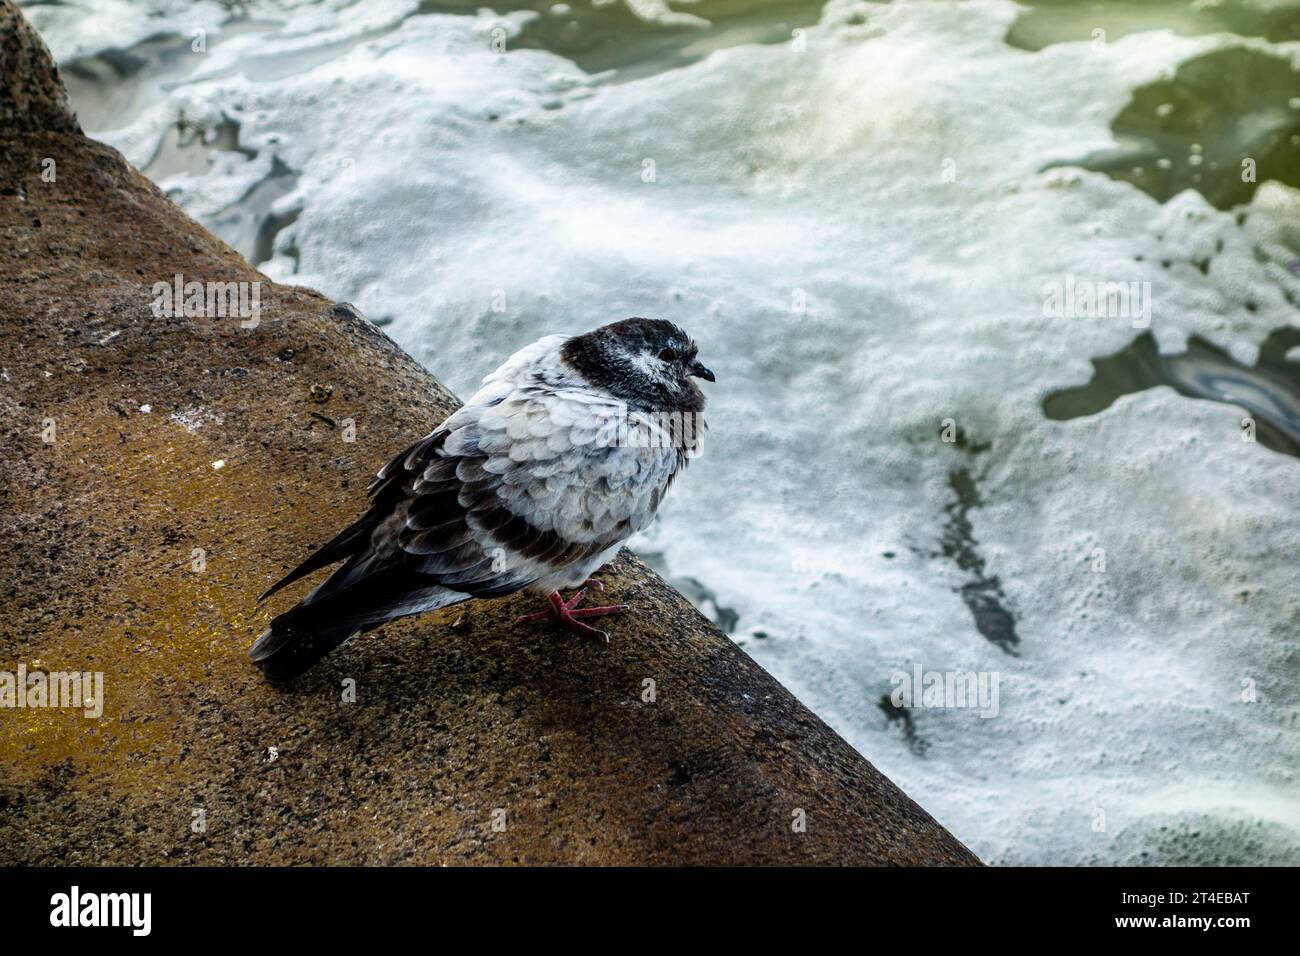 Common Pigeon, Columba livia domestica, hunched up with ruffled feathers in the wind on the edge of the foamy Hudson River, New York City, NY, USA Stock Photo